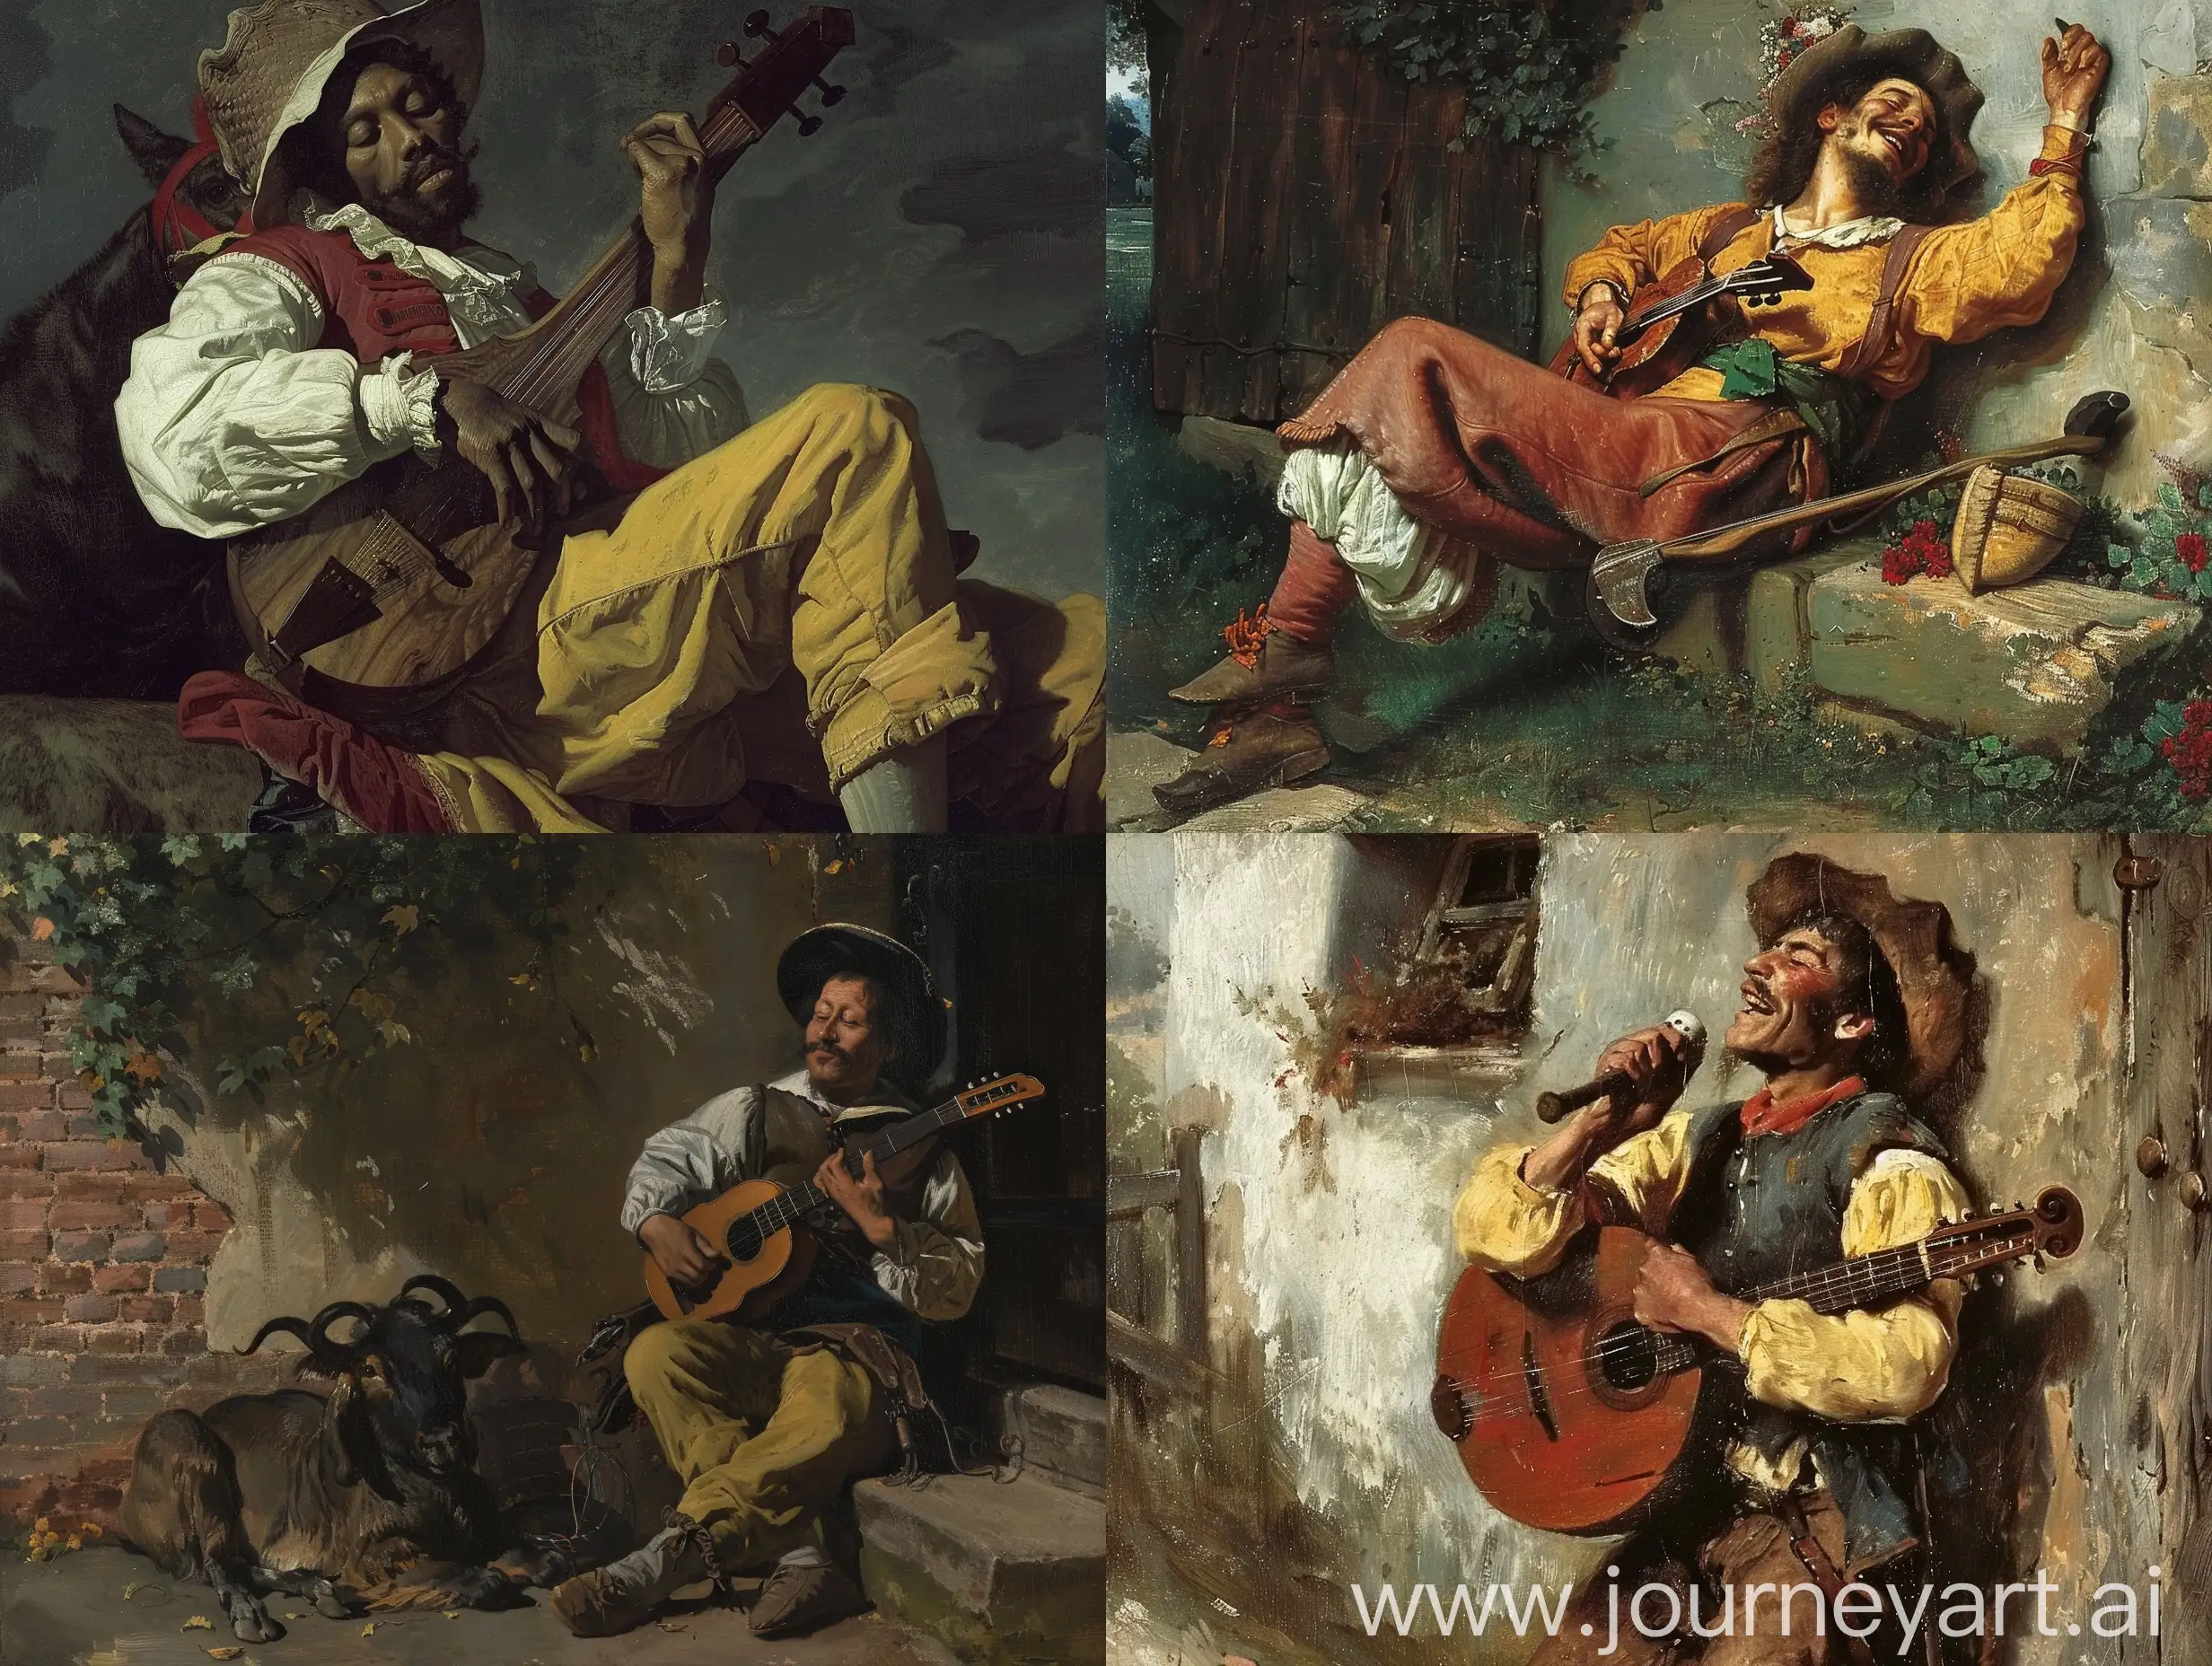 Minstrel-Playing-Mandolin-and-Mulatto-Crafting-with-Hammer-in-Dreamlike-Scene